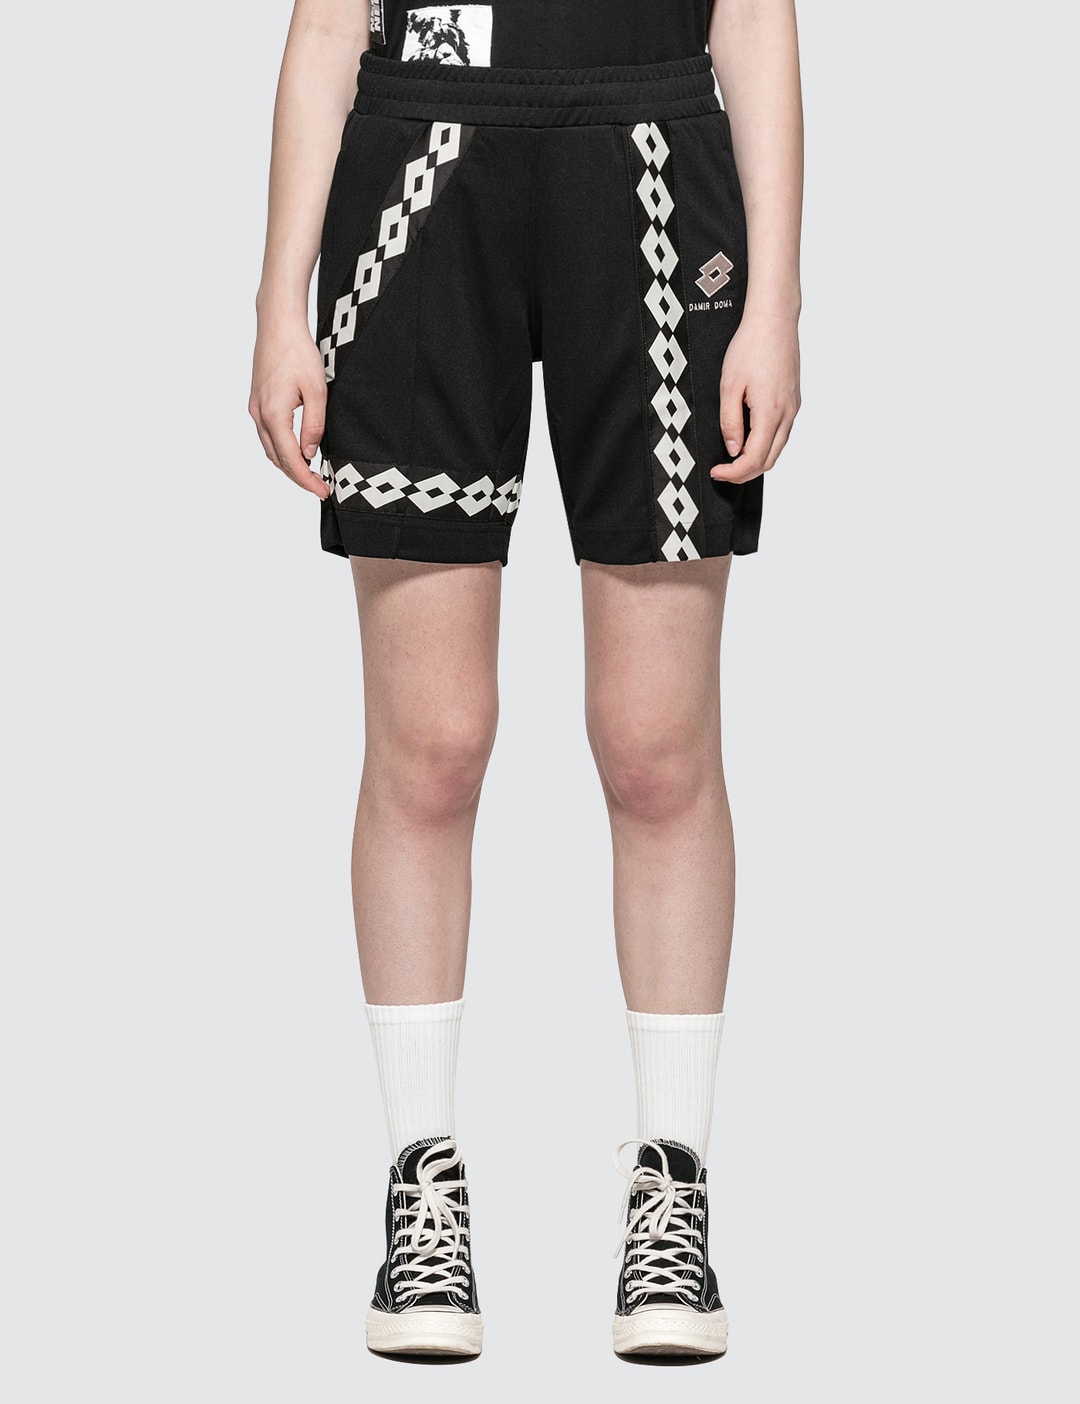 Damir Doma - Damir Doma x Lotto Parise Shorts | HBX - Globally Curated ...